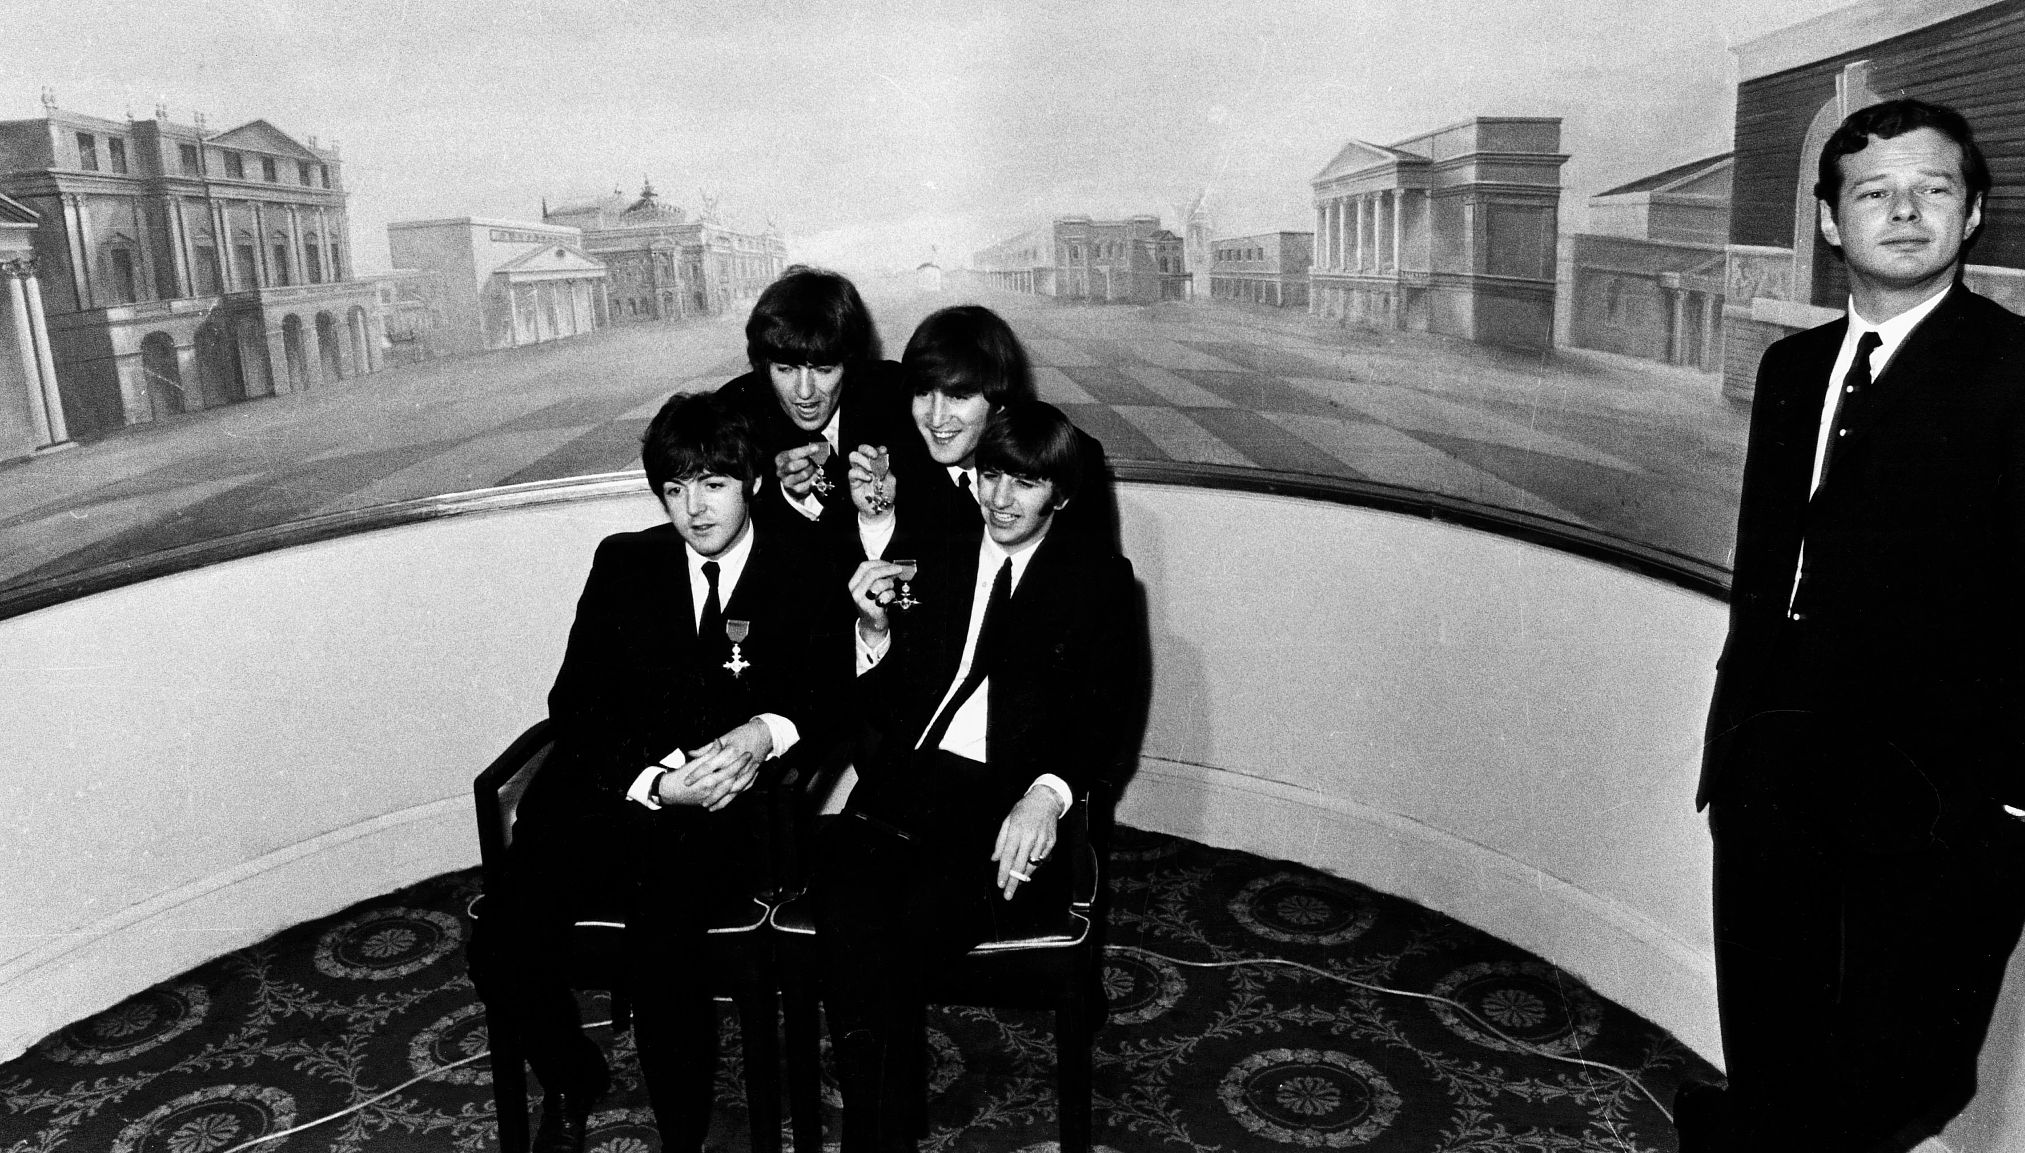 Paul McCartney, George Harrison, John Lennon and Ringo Starr holding their Member of the Order of the British Empire awarded to them at Buckingham Palace